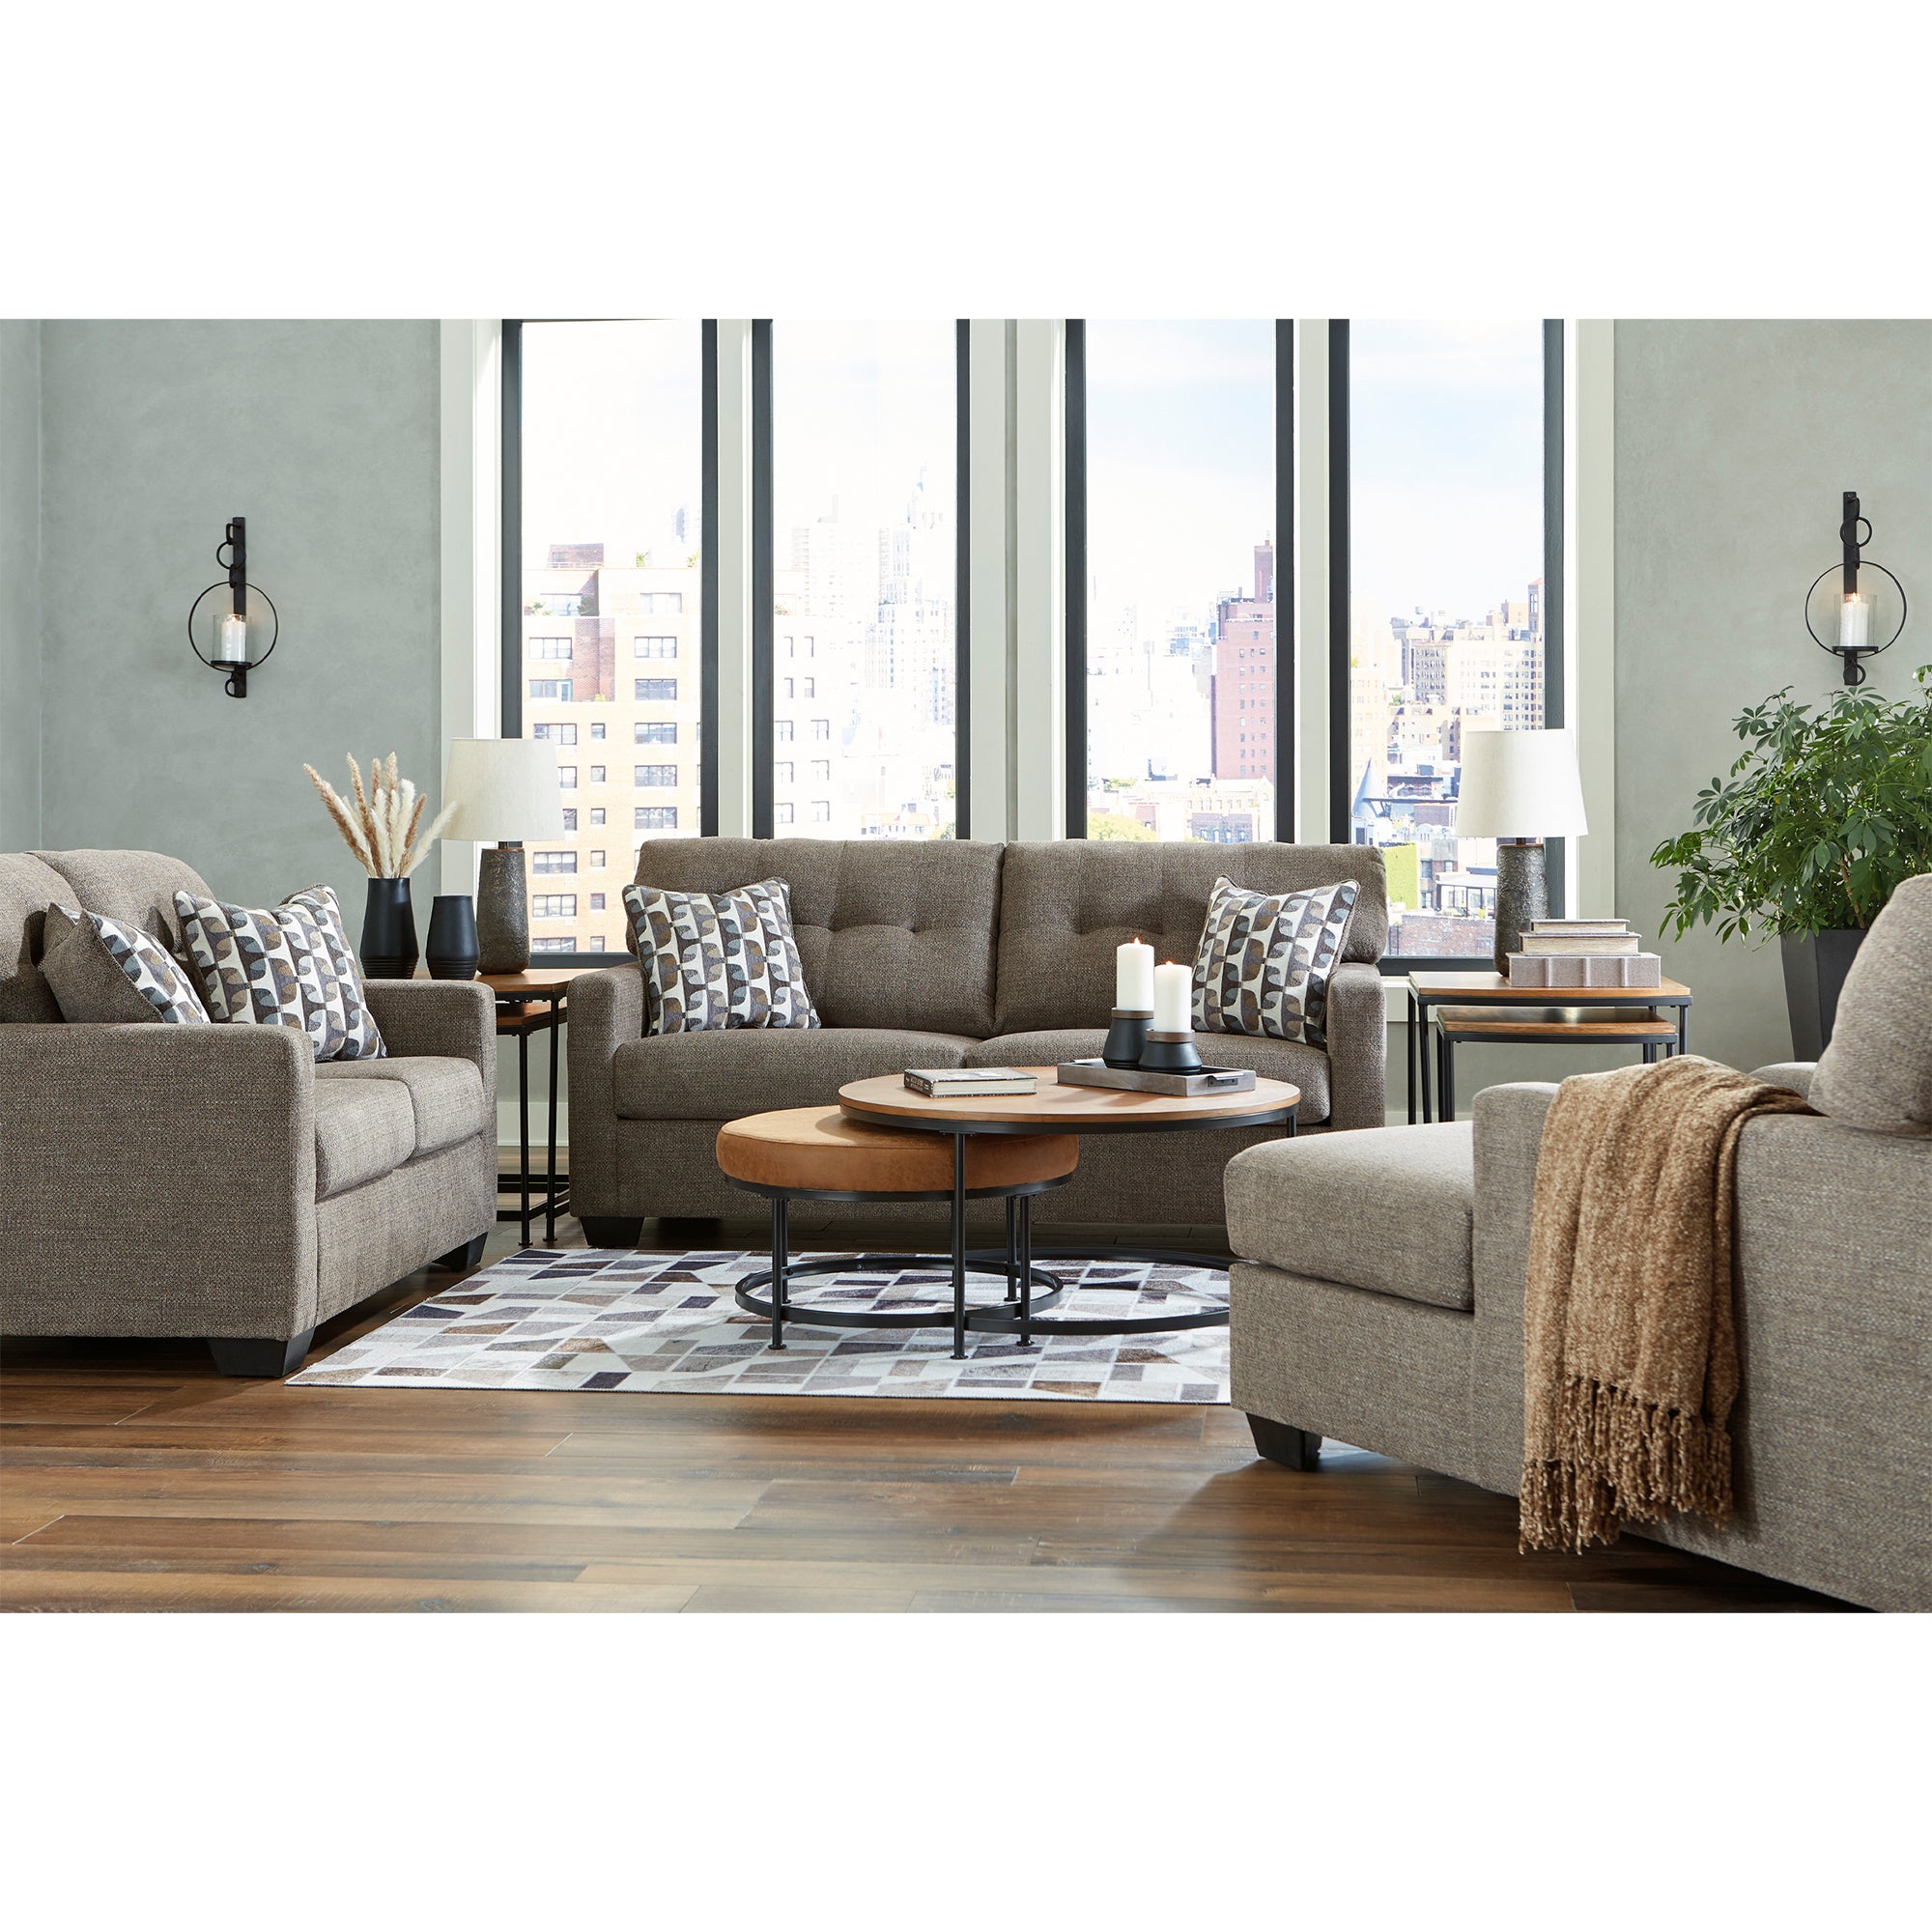 Chic and cozy Mahoney Sofa and Loveseat in chocolate, enhances any space with sophisticated comfort